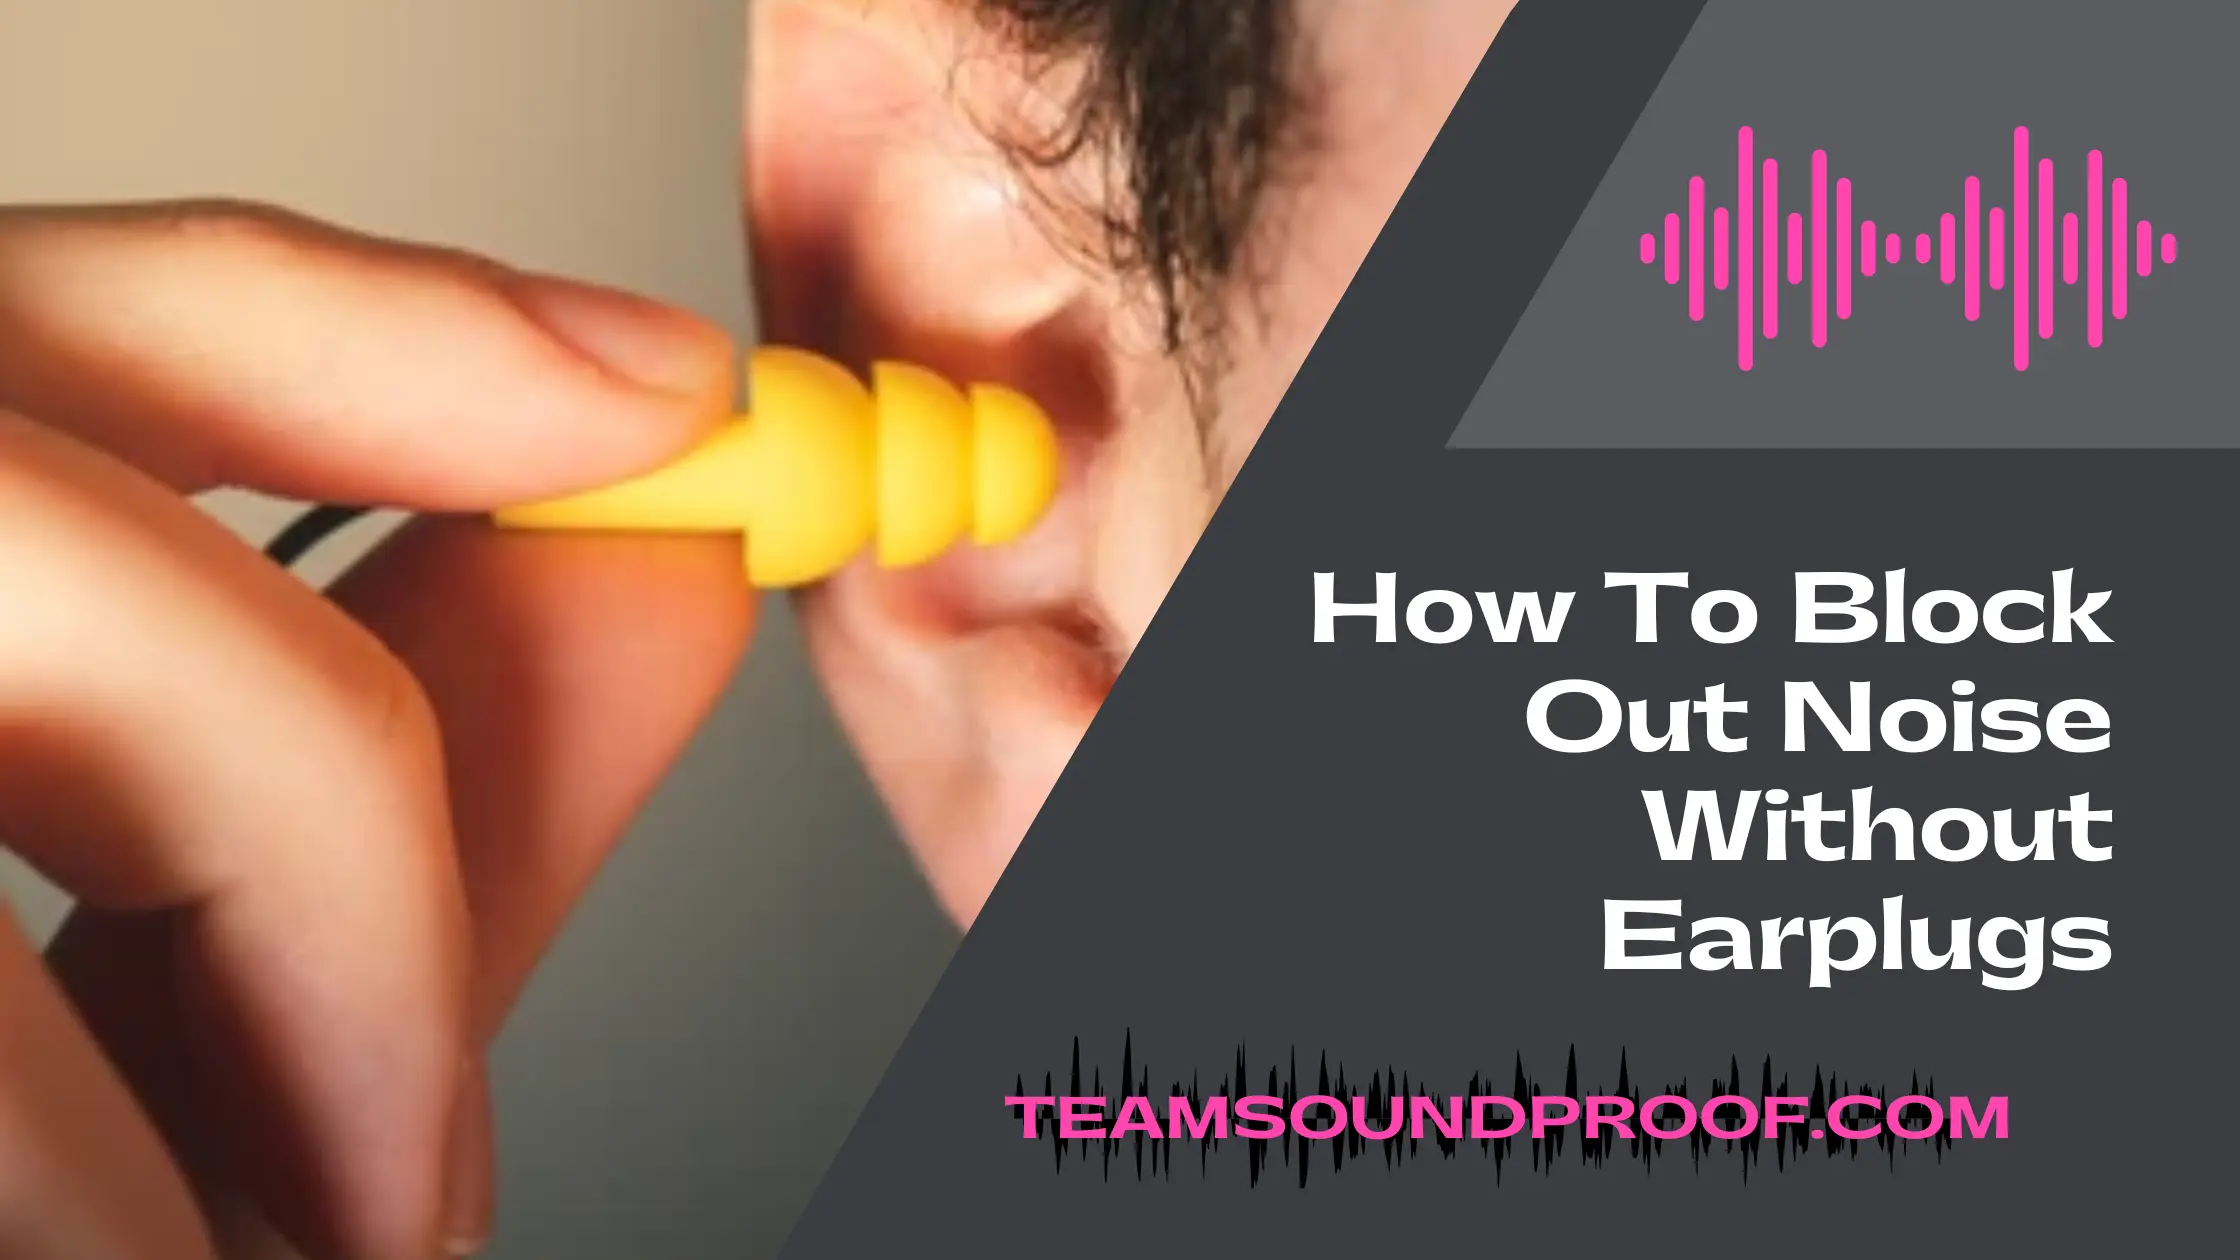 How To Block Out Noise Without Earplugs? Simple Guide